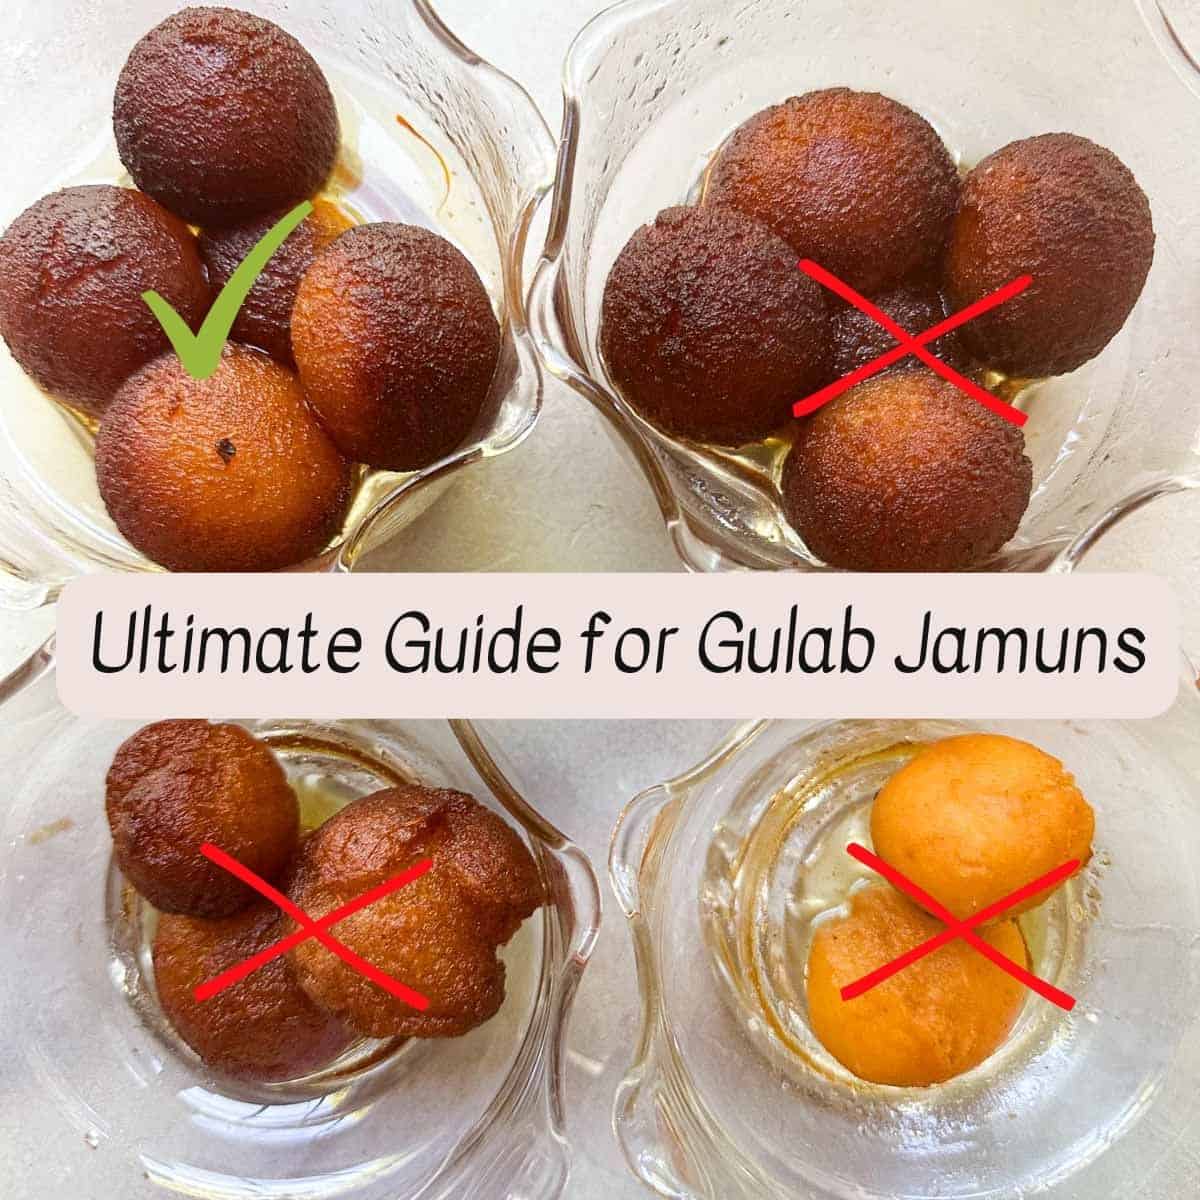 A photo with four glass cups of gulab jamuns. 3 of the glasses have an x icon indicating that those are mistakes. 1 glass has a green check mark indicating it is the correct way to make a gulab jamun.